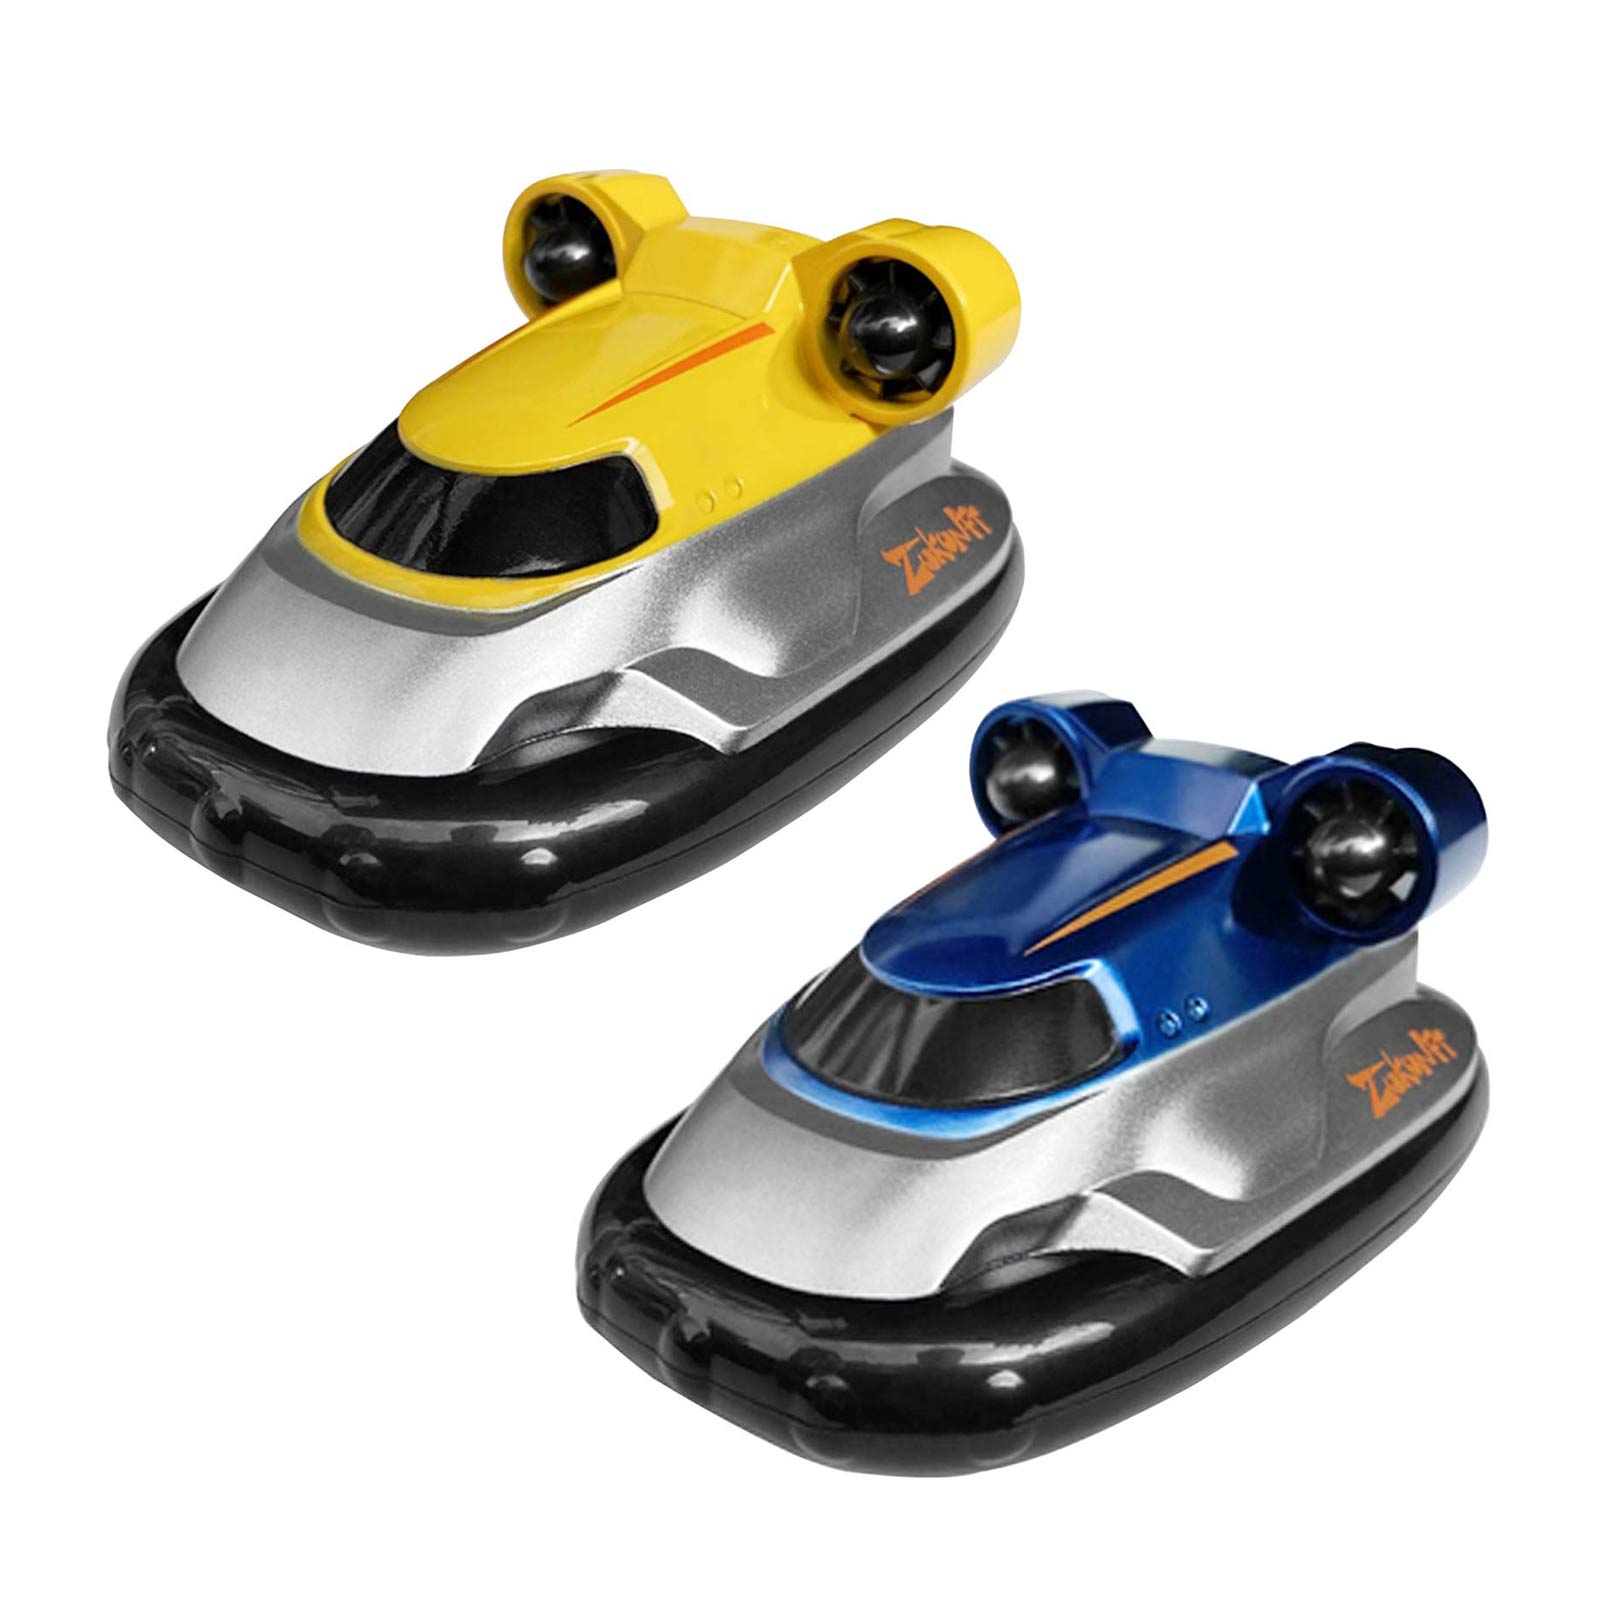 2.4G Mini Remote Control Speed Boat RC Hovercraft Speedboat Models For Boys Children Water Pool Toys Gift